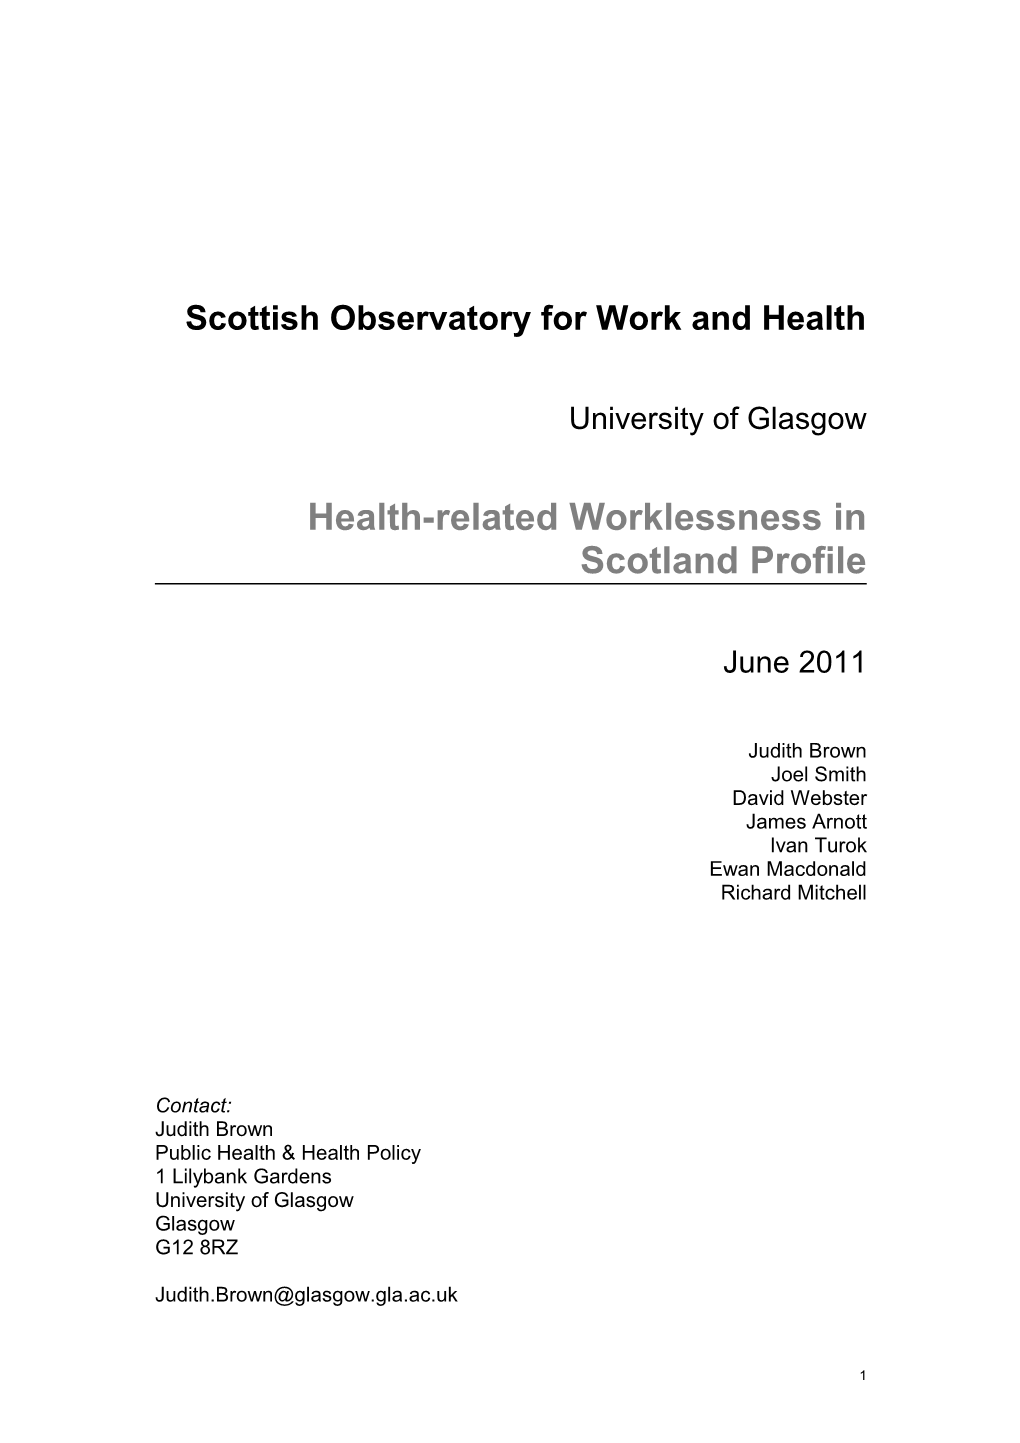 Total Sickness Benefit Data – Figures 1-9 Updated from Glasgow Profile